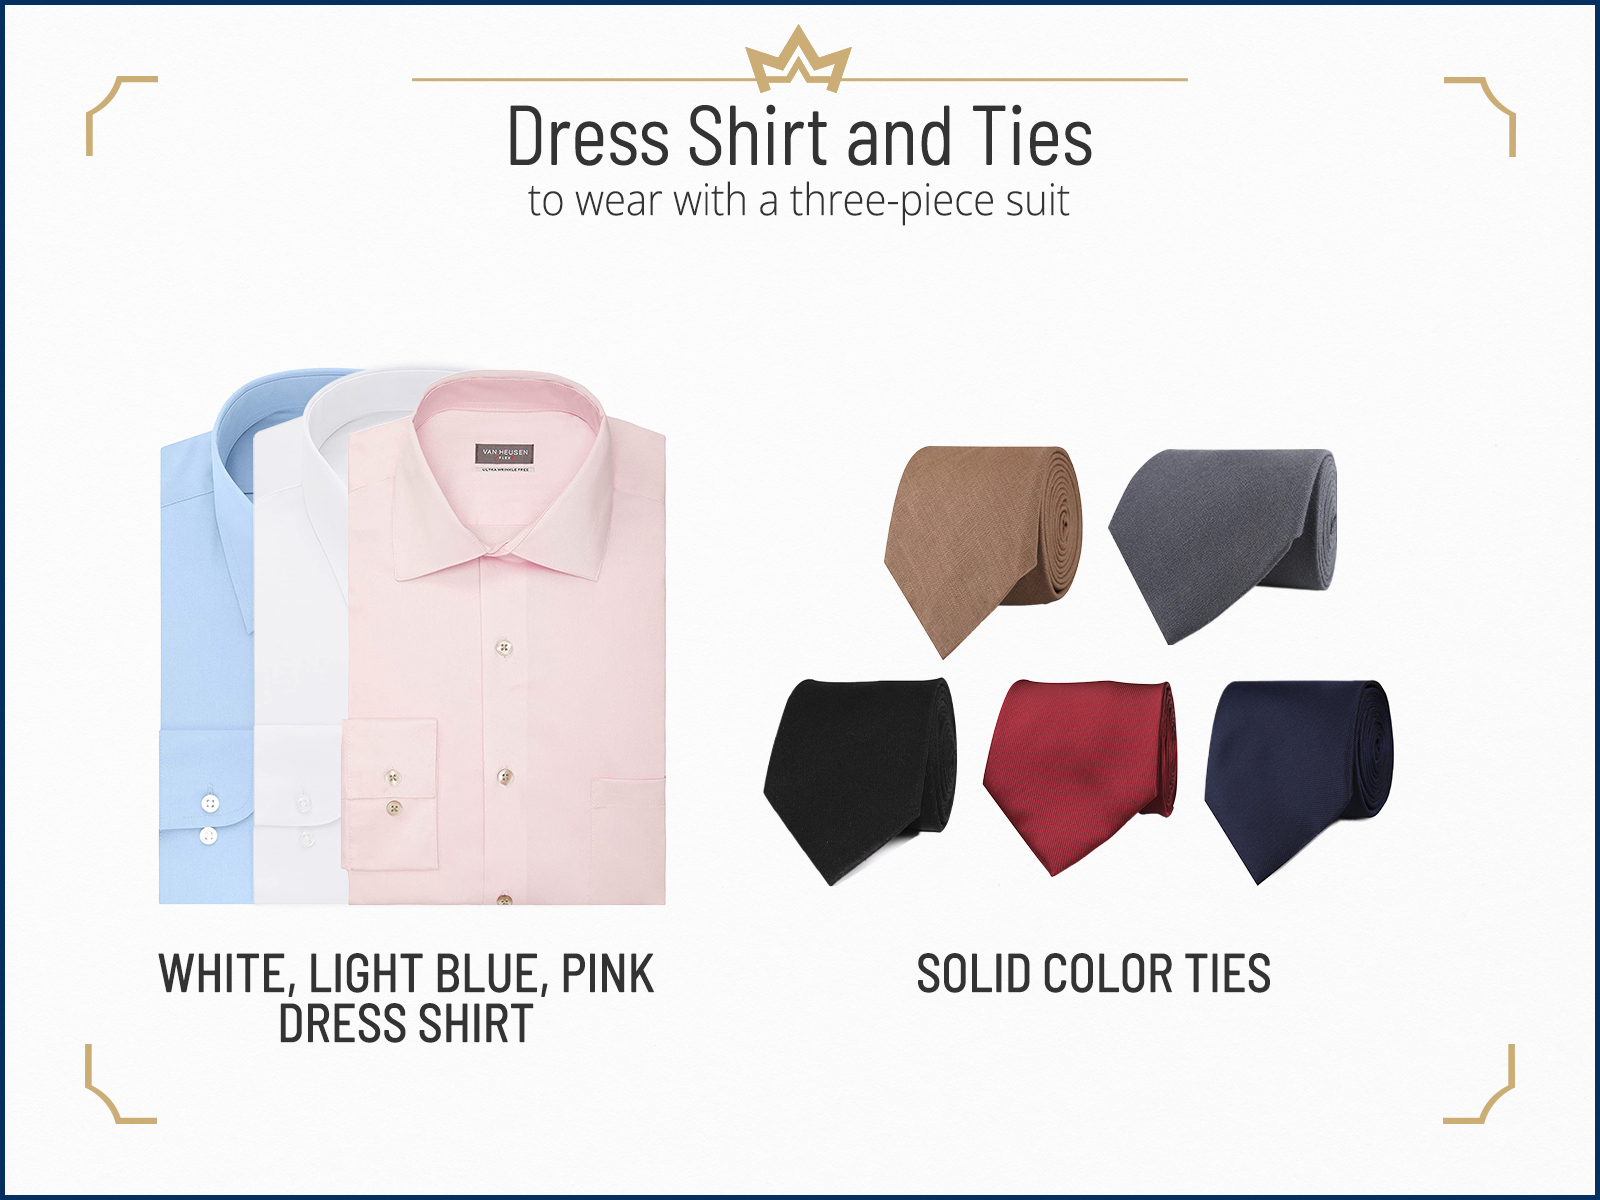 Standard choices to match a three-piece suit with a dress shirt and tie